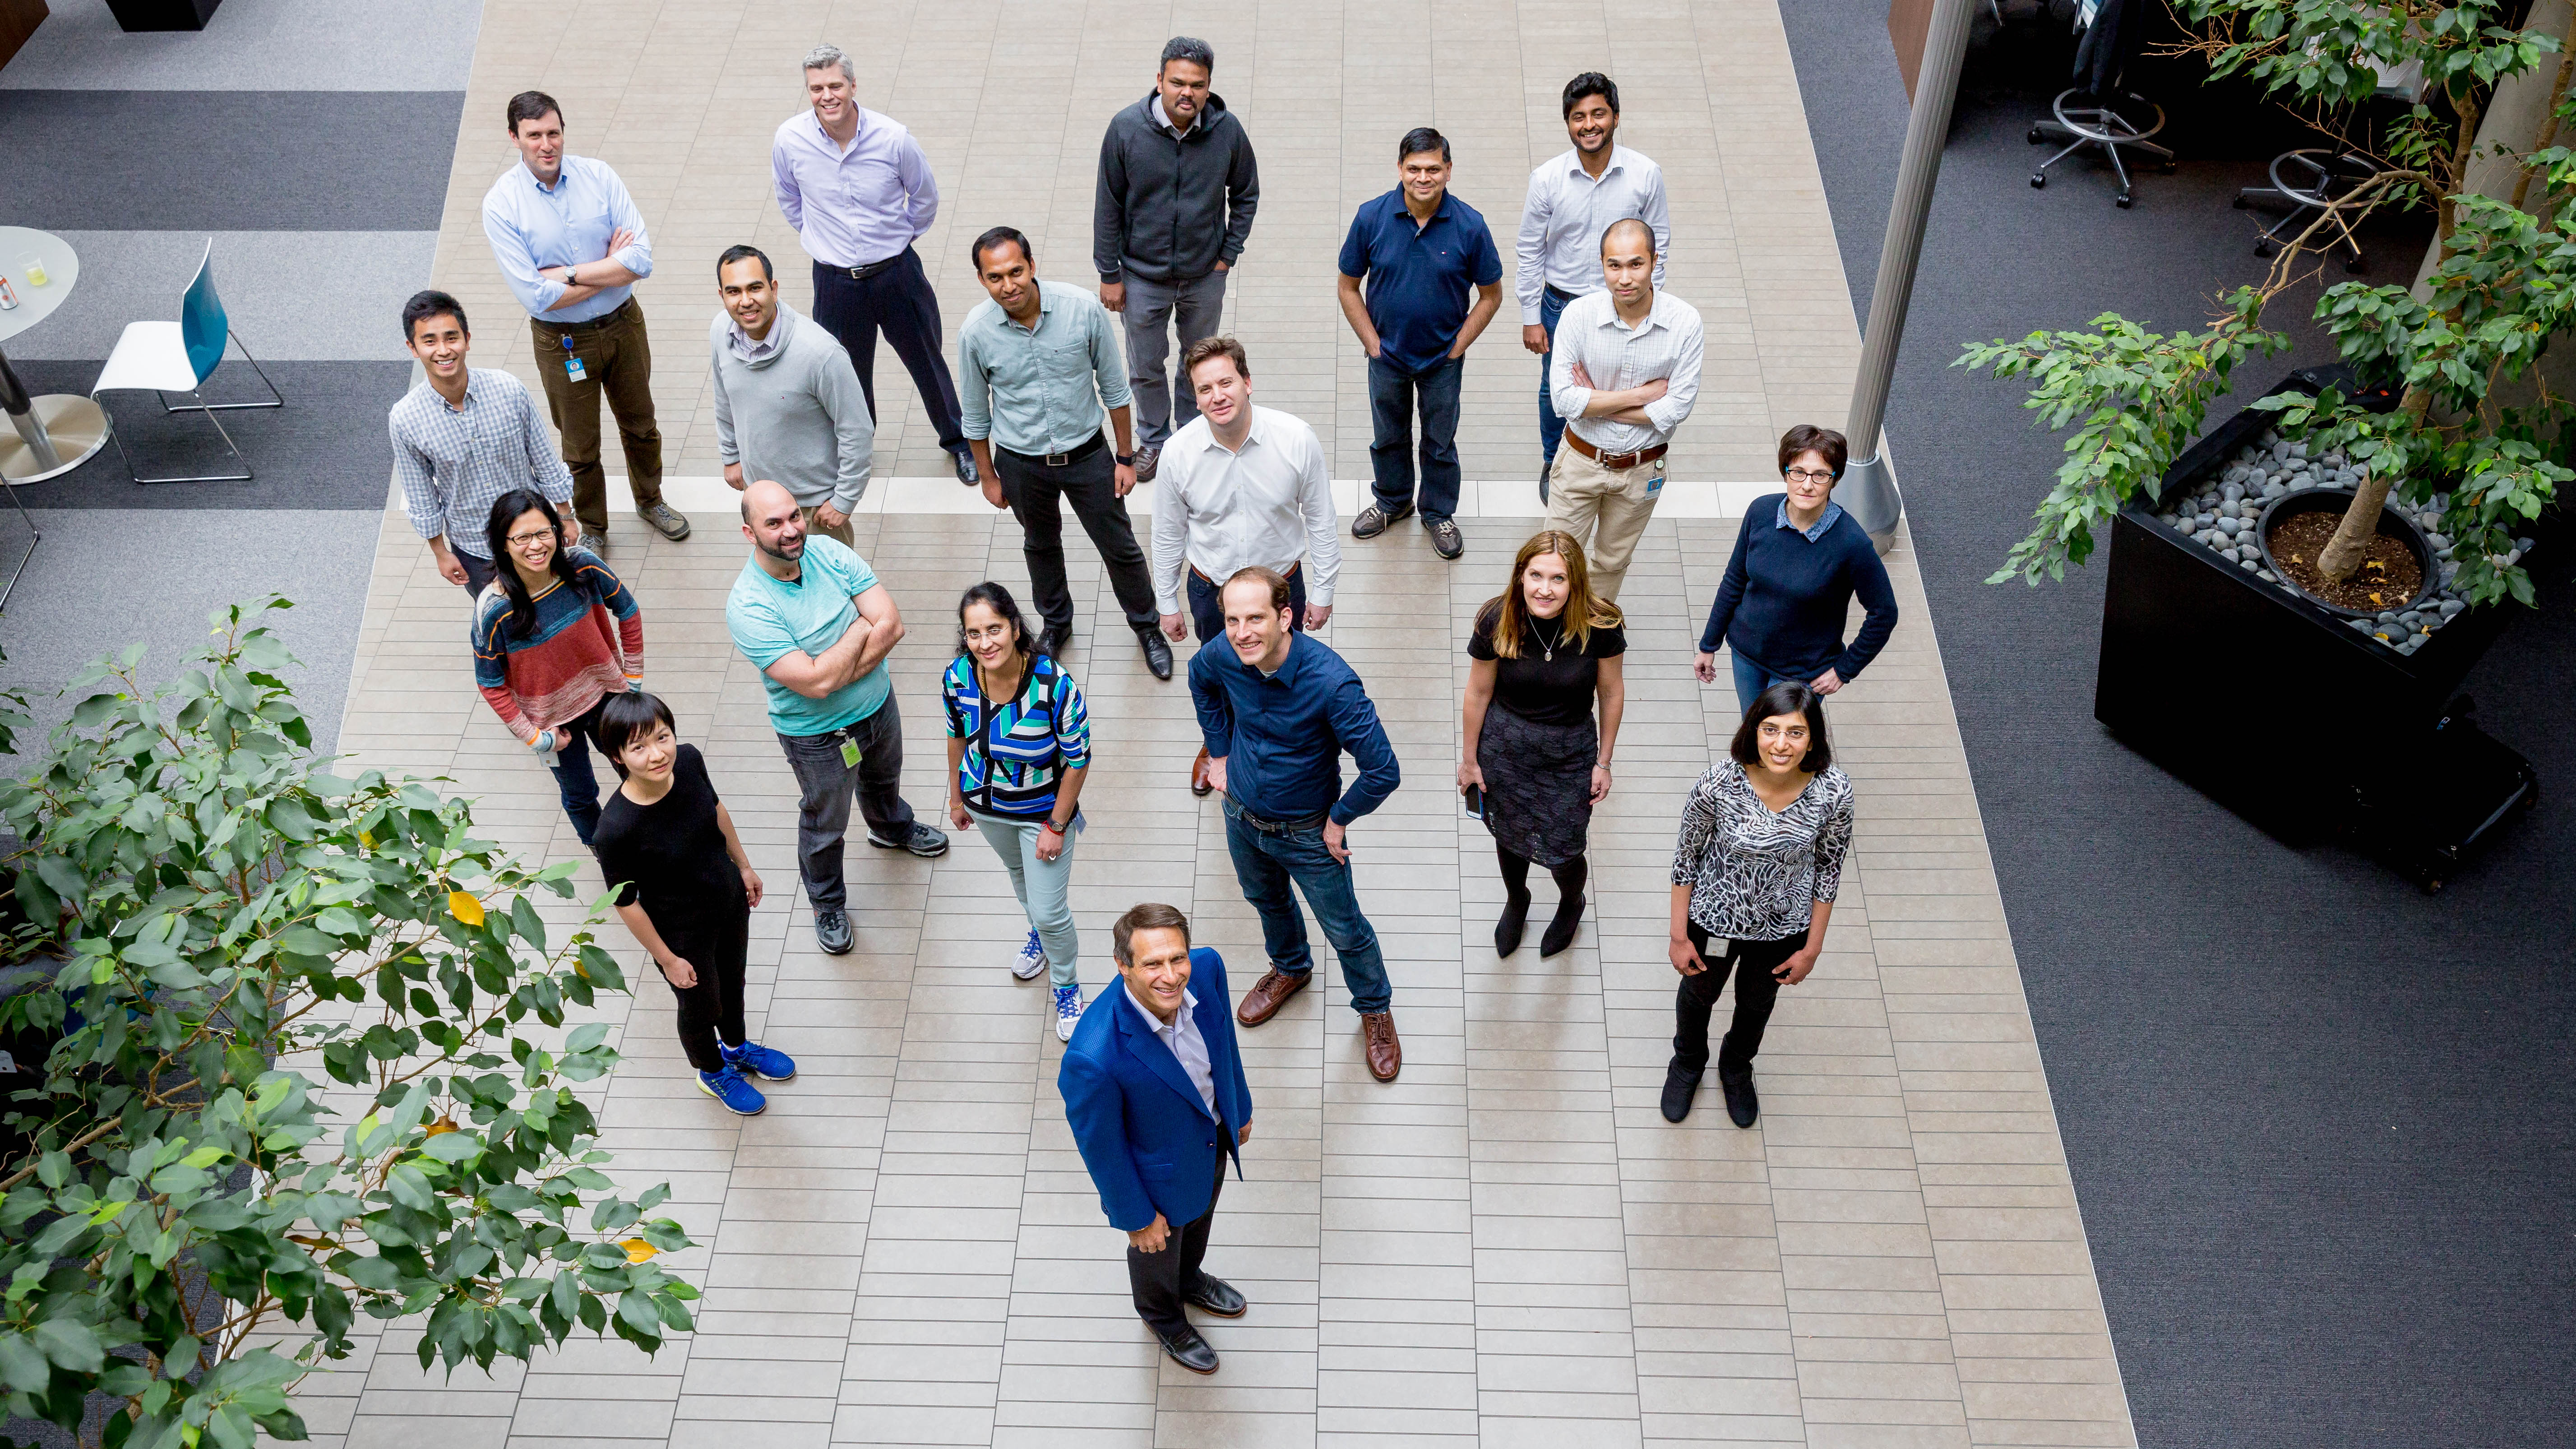 Group photo of some of the Microsoft team members who worked on the SIDS research tool